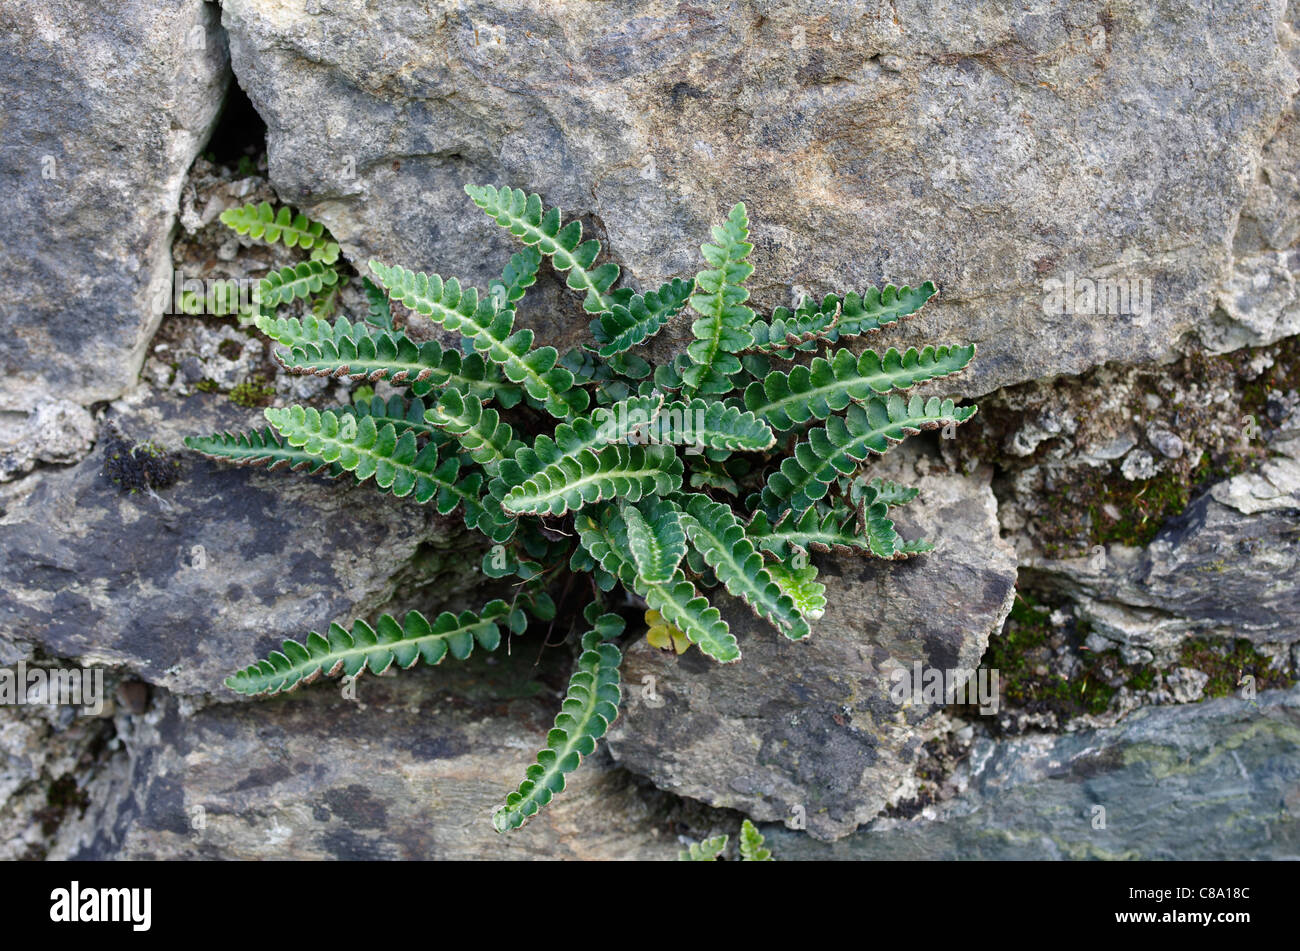 Rusty-back fern growing on the mortar between the stones of a wall. Llyn Cefni, Anglesey, Wales, UK. Stock Photo